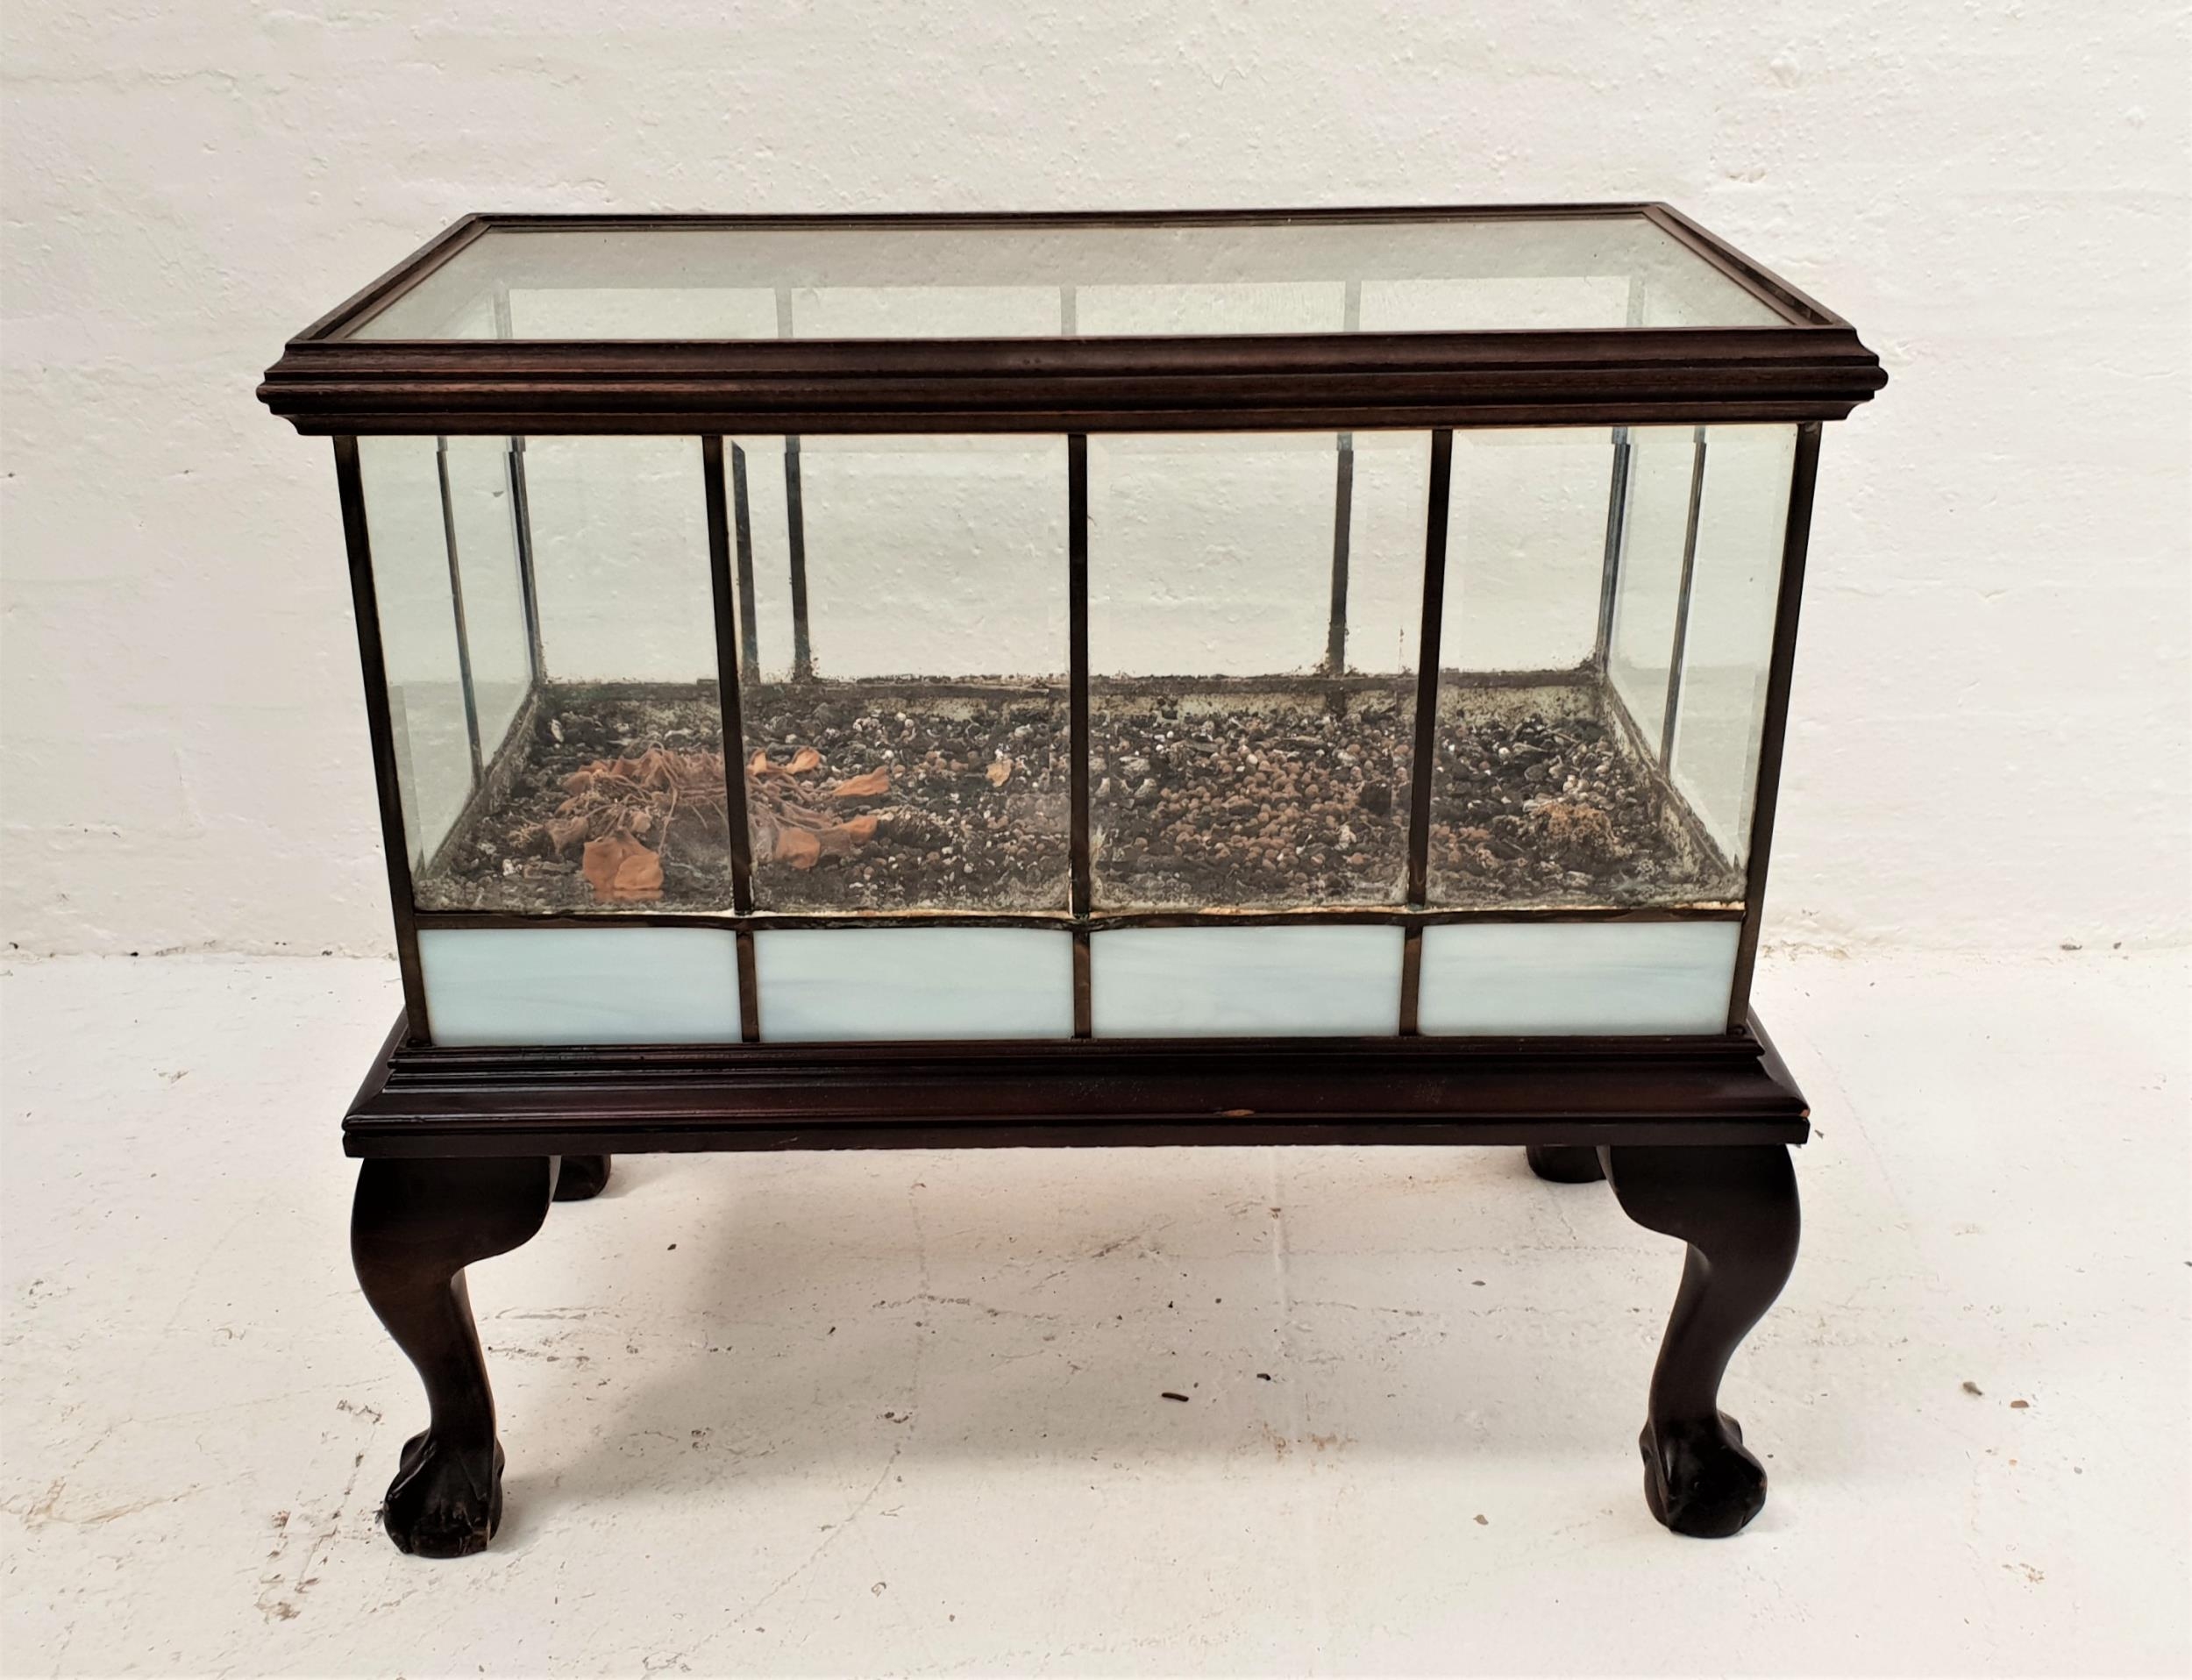 MAHOGANY AND GLASS TERRARIUM of oblong form with a lift off glass lid above a metal frame with glass